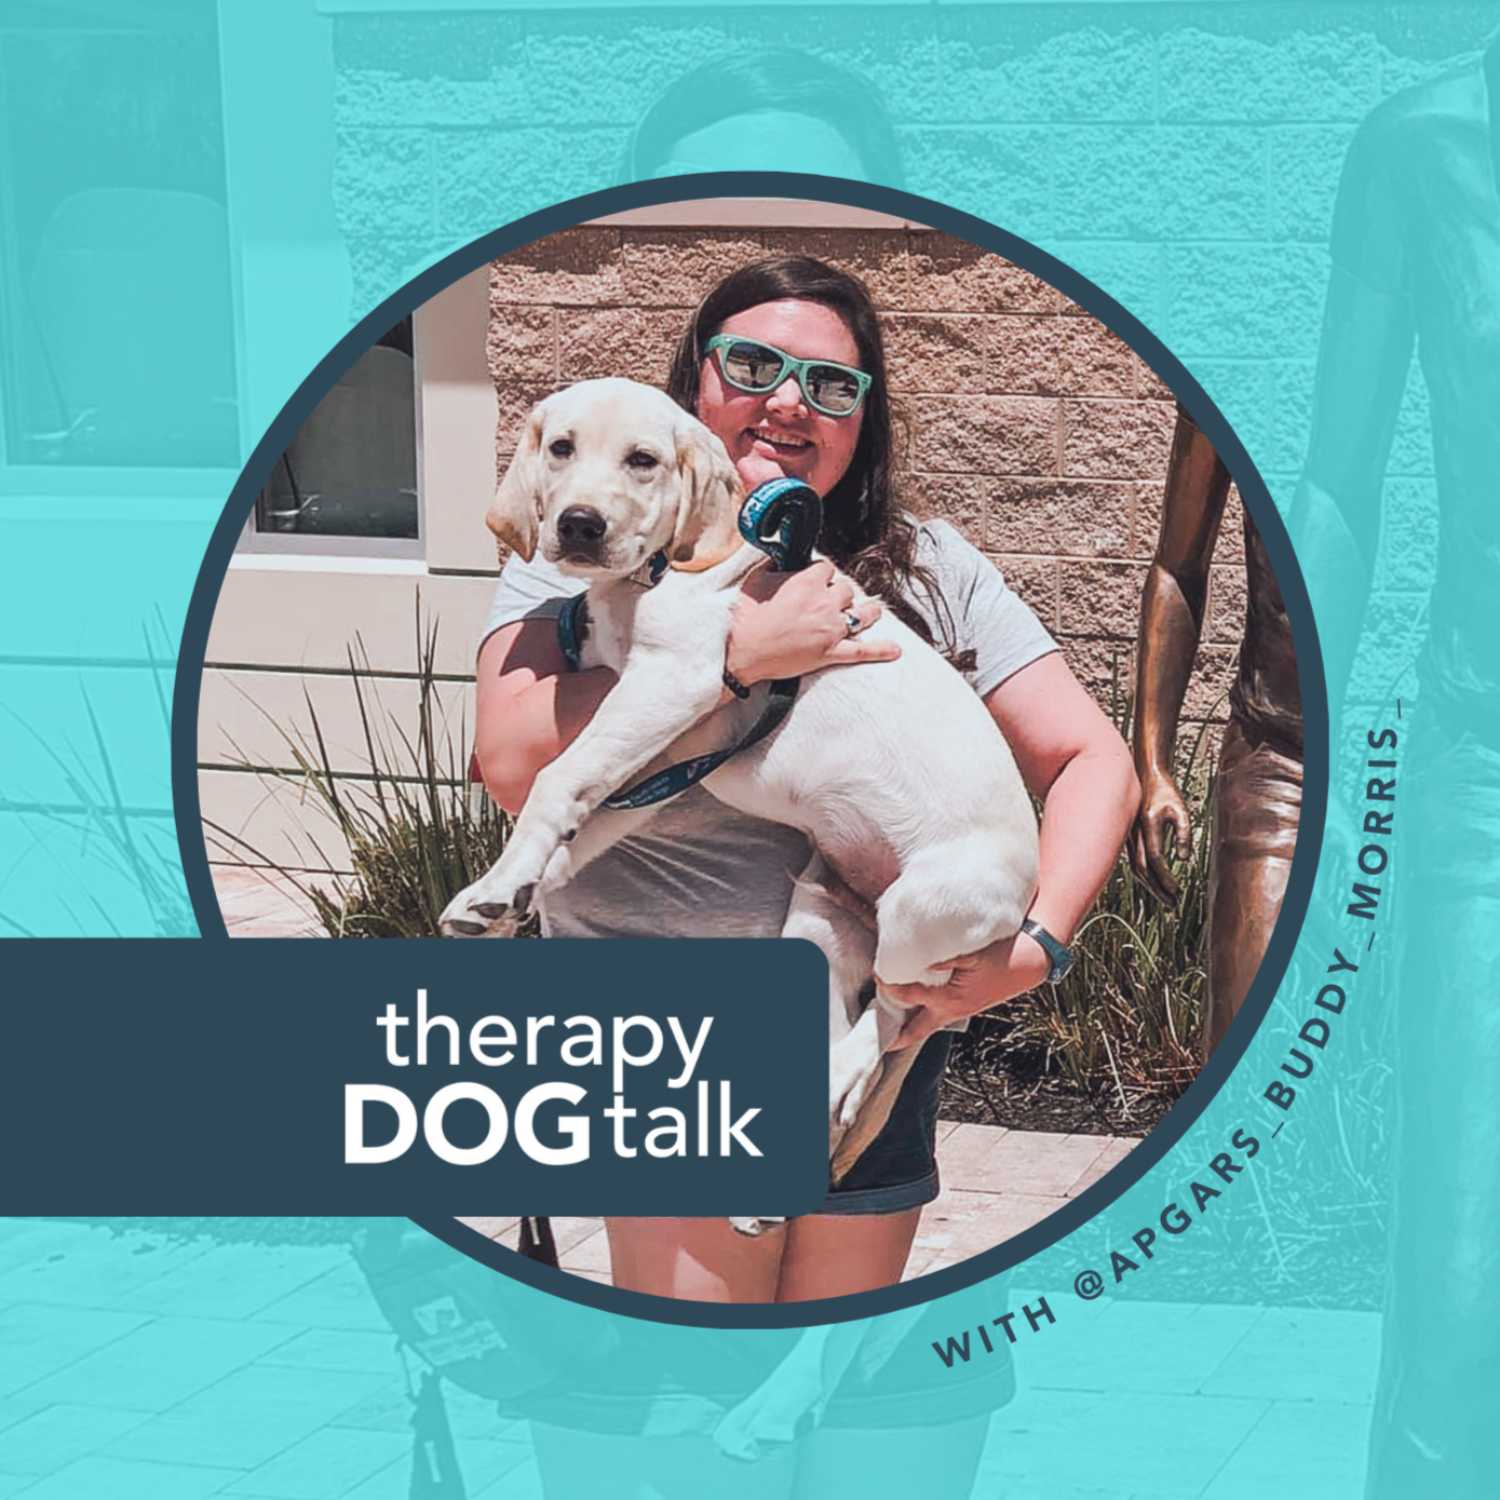 Hallie + Apgar: An Animal Assisted Therapy team in Georgia.